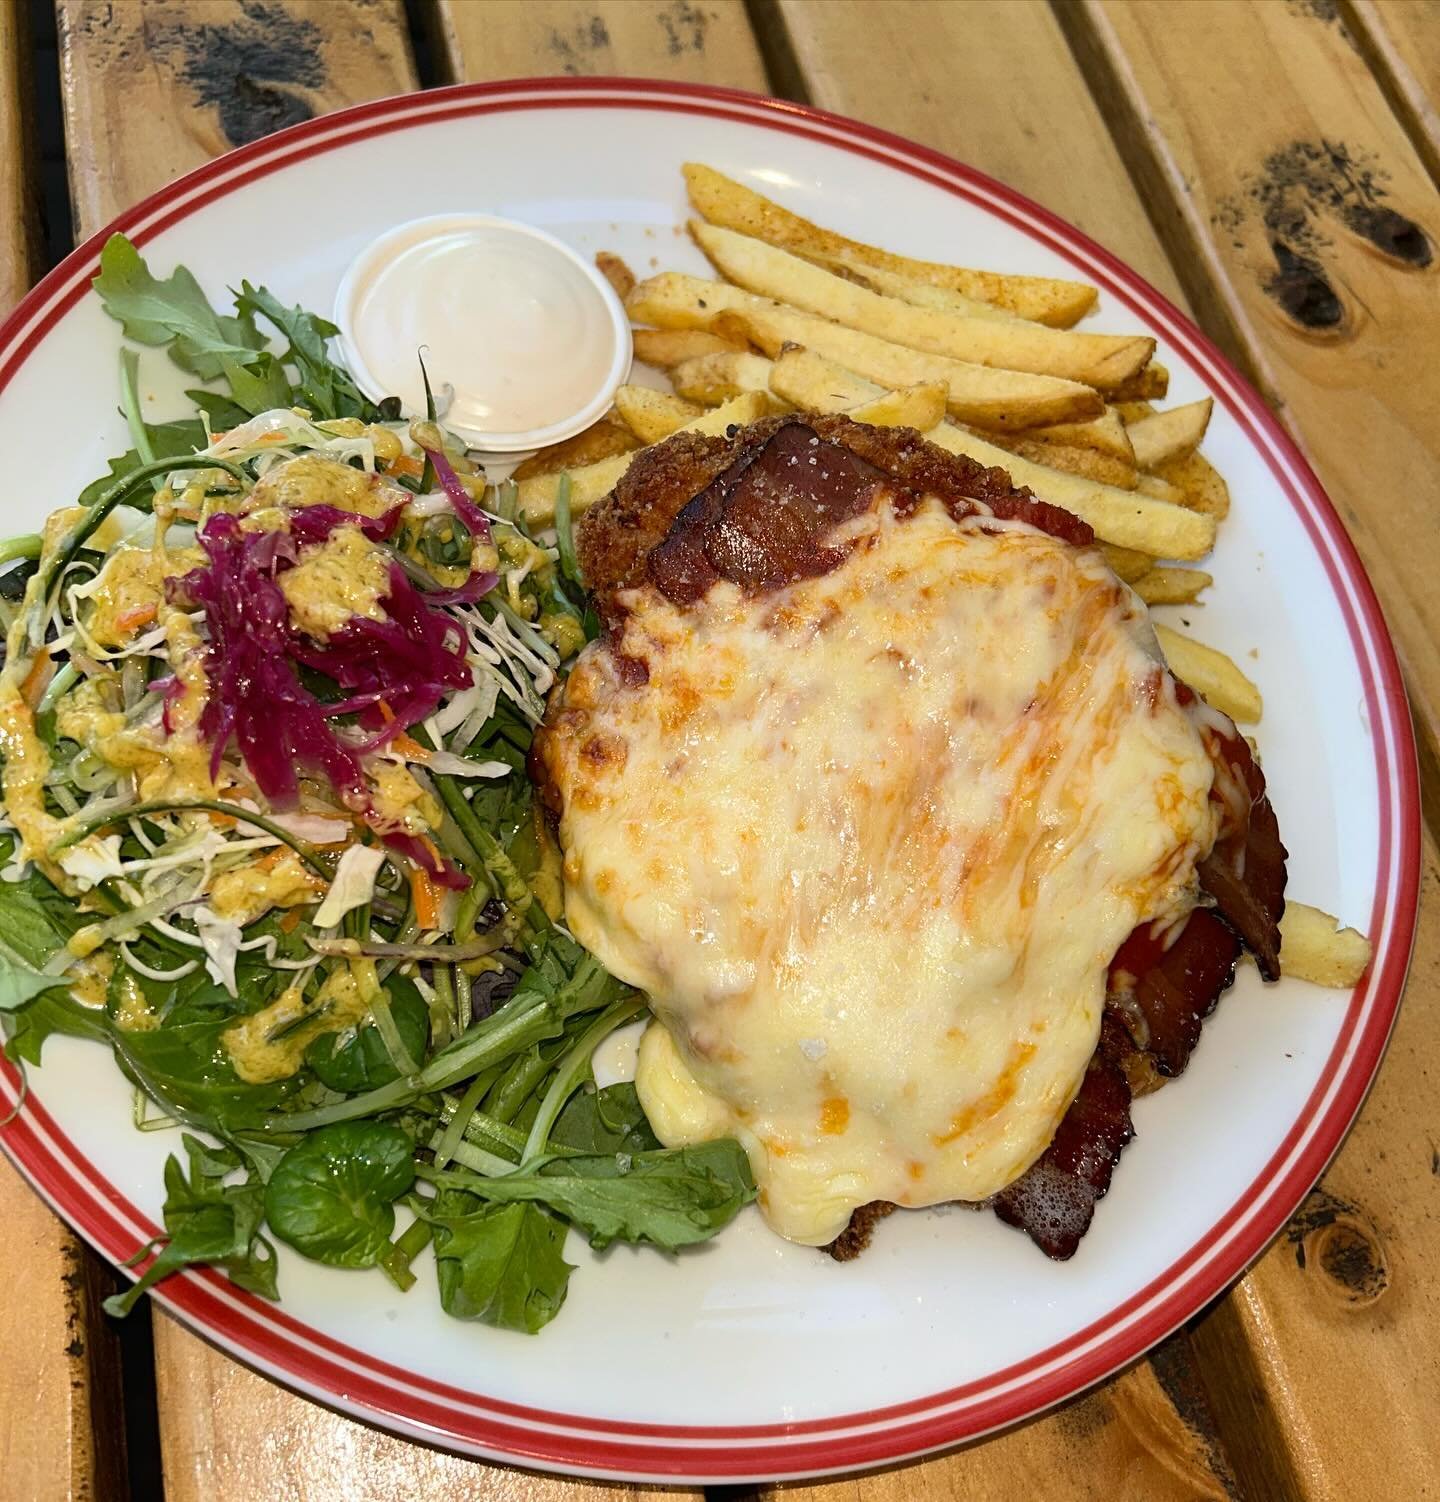 MAPLE BACON PARMI $20 TODAY! 🐷 

CHICKEN SCHNITZEL, MAPLE BACON, NAP SAUCE, MOZZARELLA, SALAD, CHIPS 

TAG YOUR FRIENDS, AVAILABLE FROM 5PM 

SEE YOU AT THE BREWPUB X